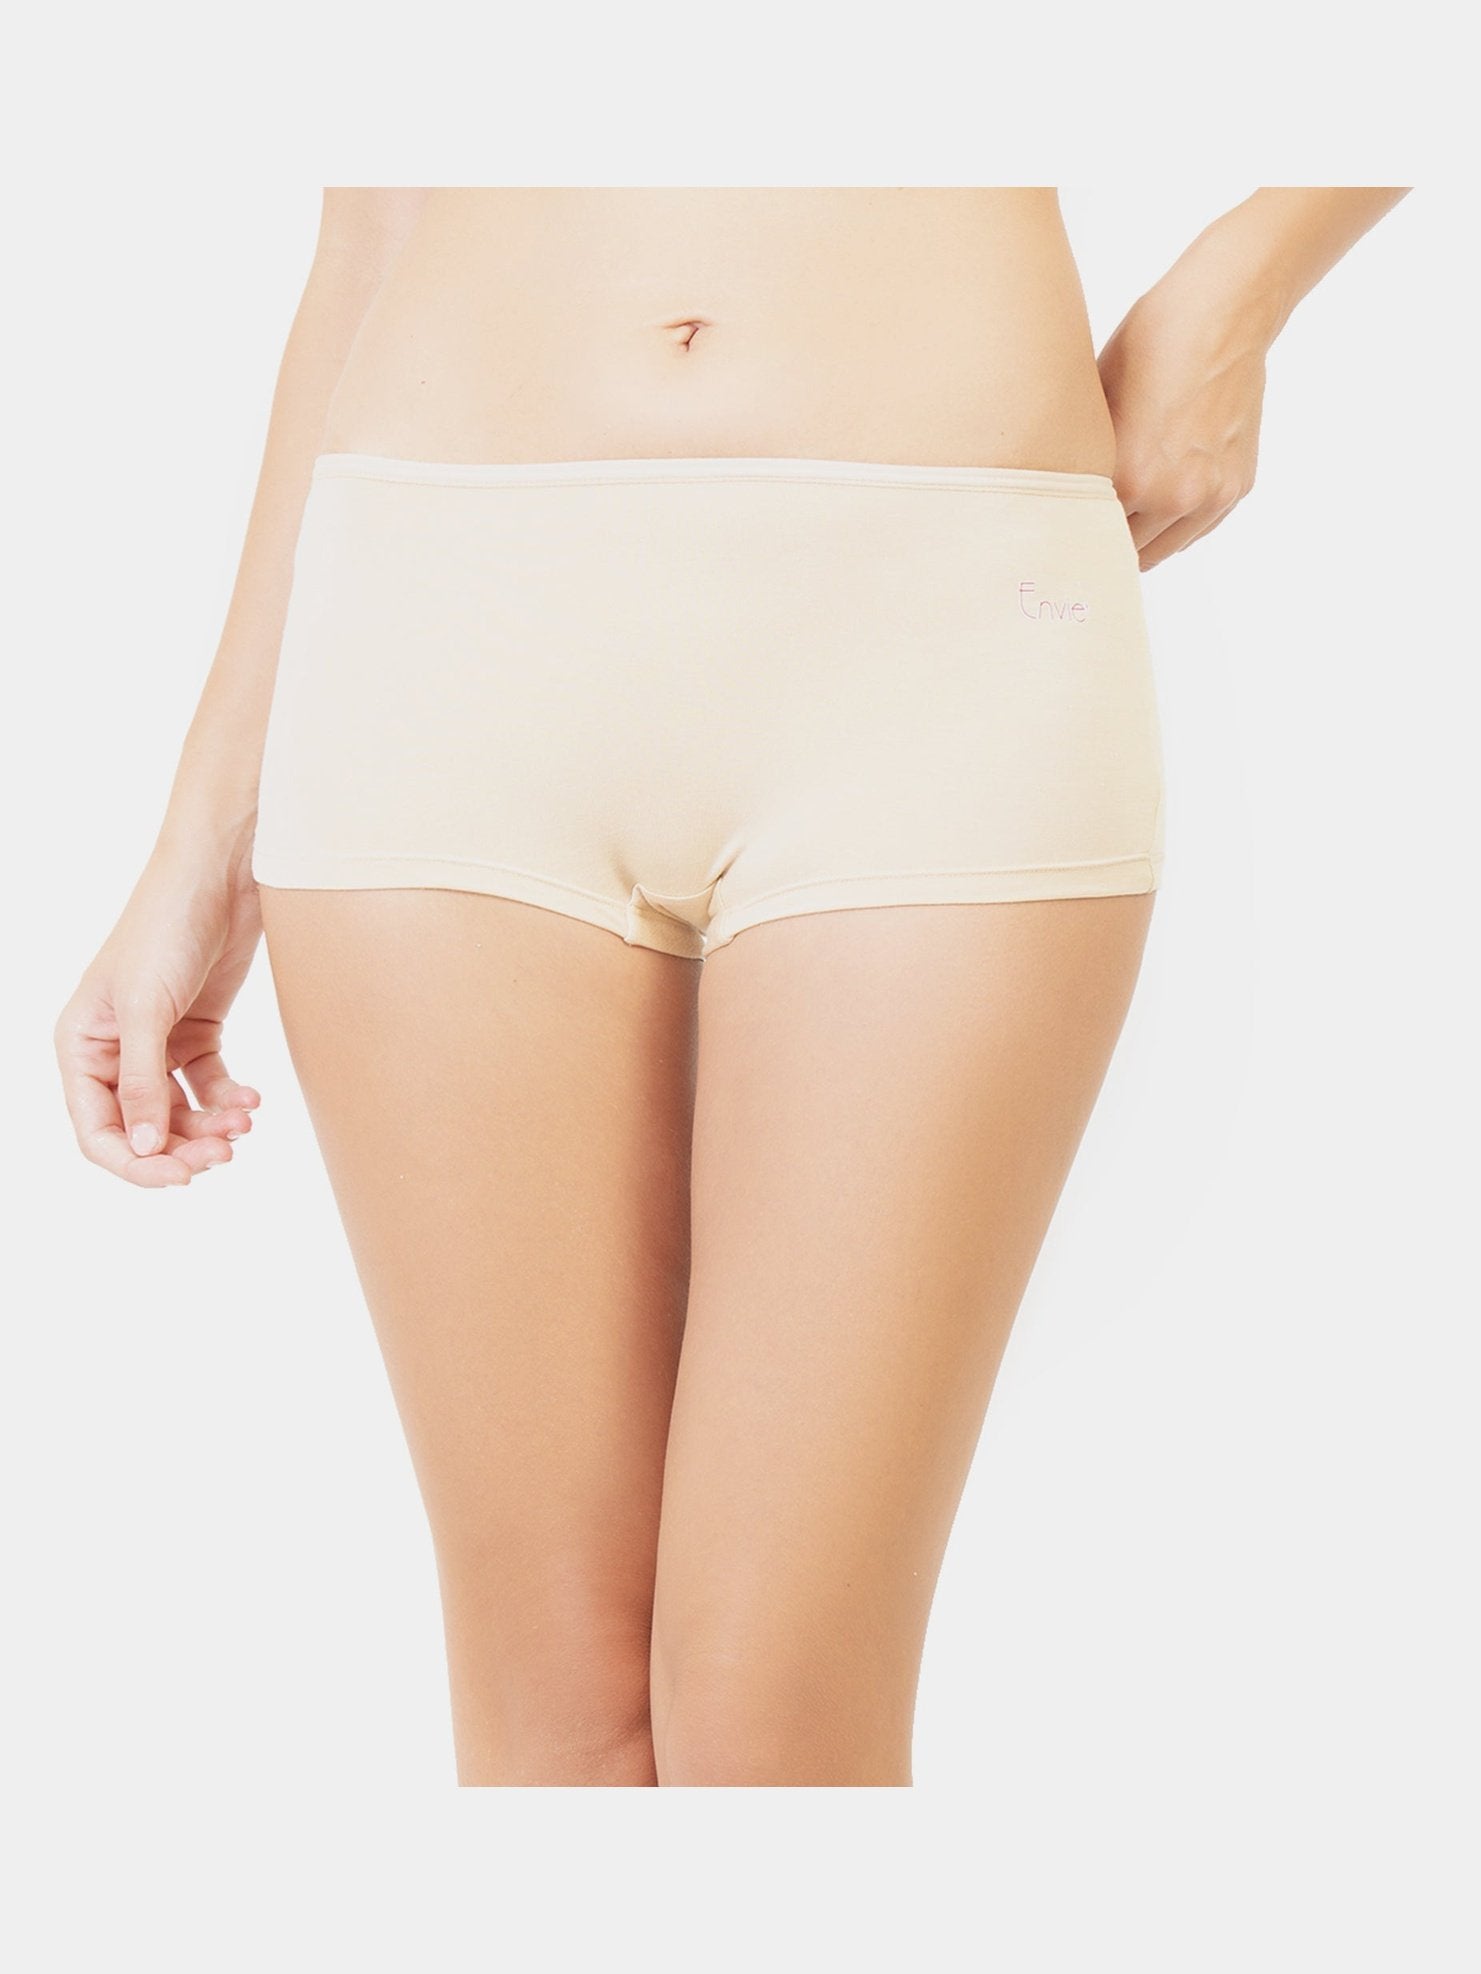 Envie Under Skirt, Boy Shorts, Super Soft fabric for soft touch comfort